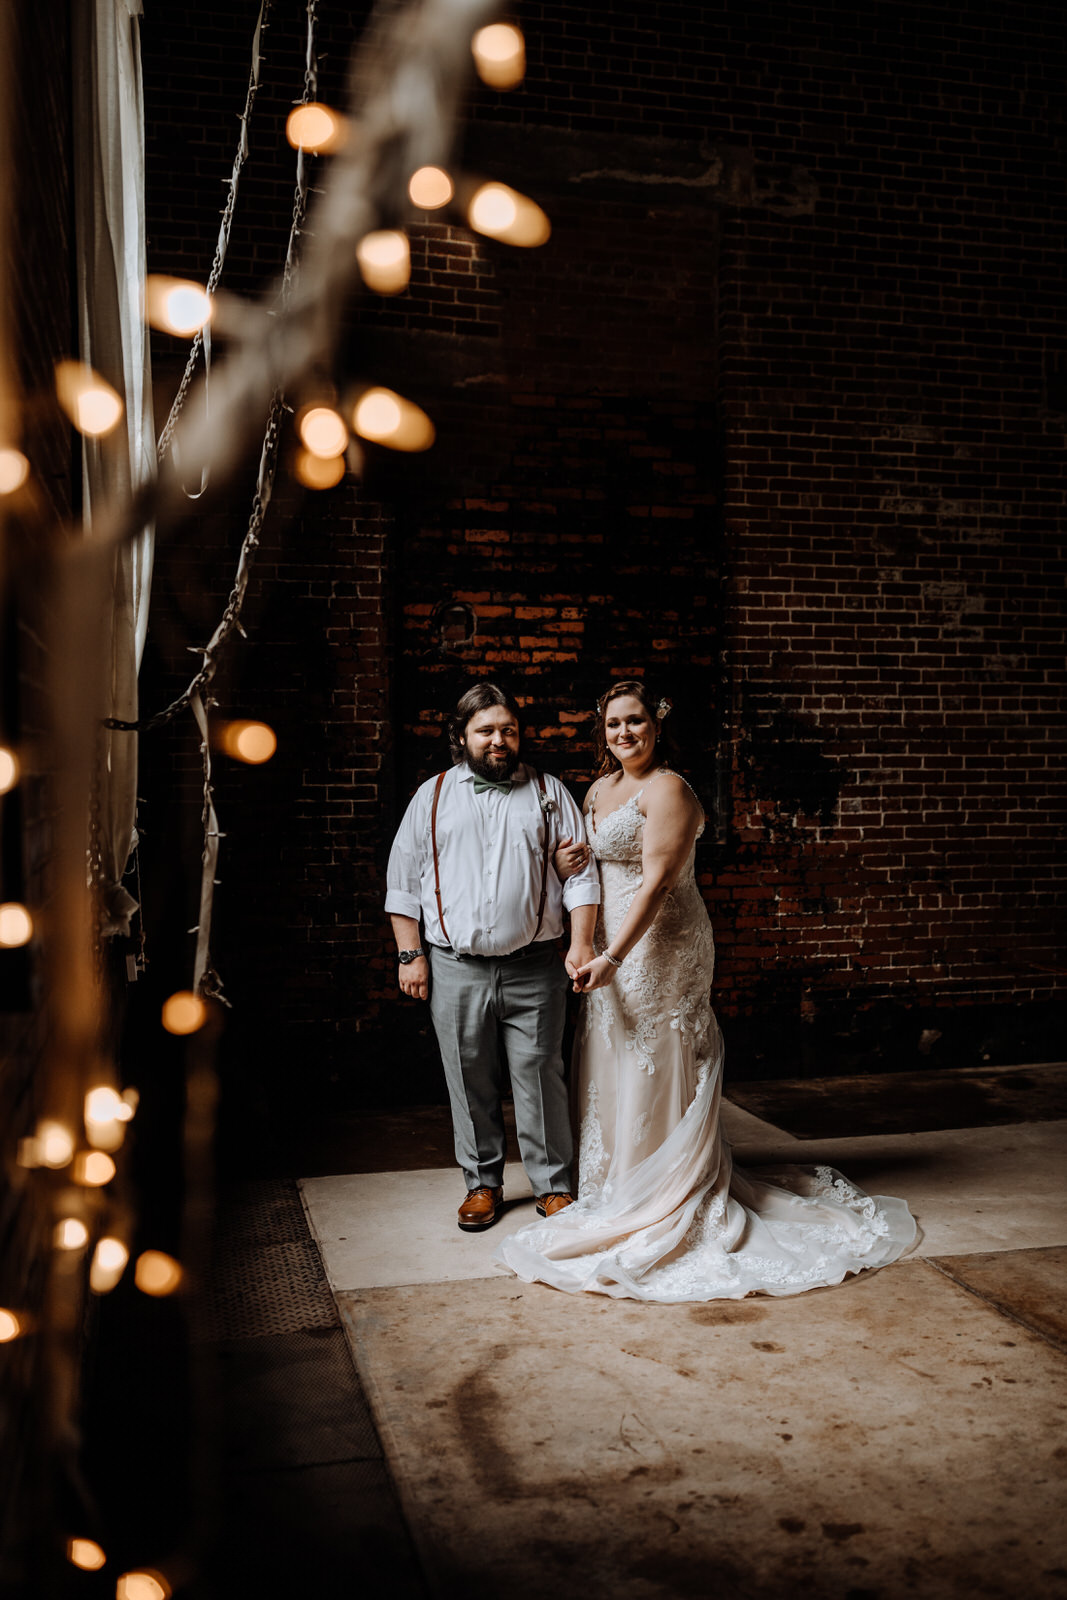 Bride & Groom Portrait in front of a brick wall with window light with string lights